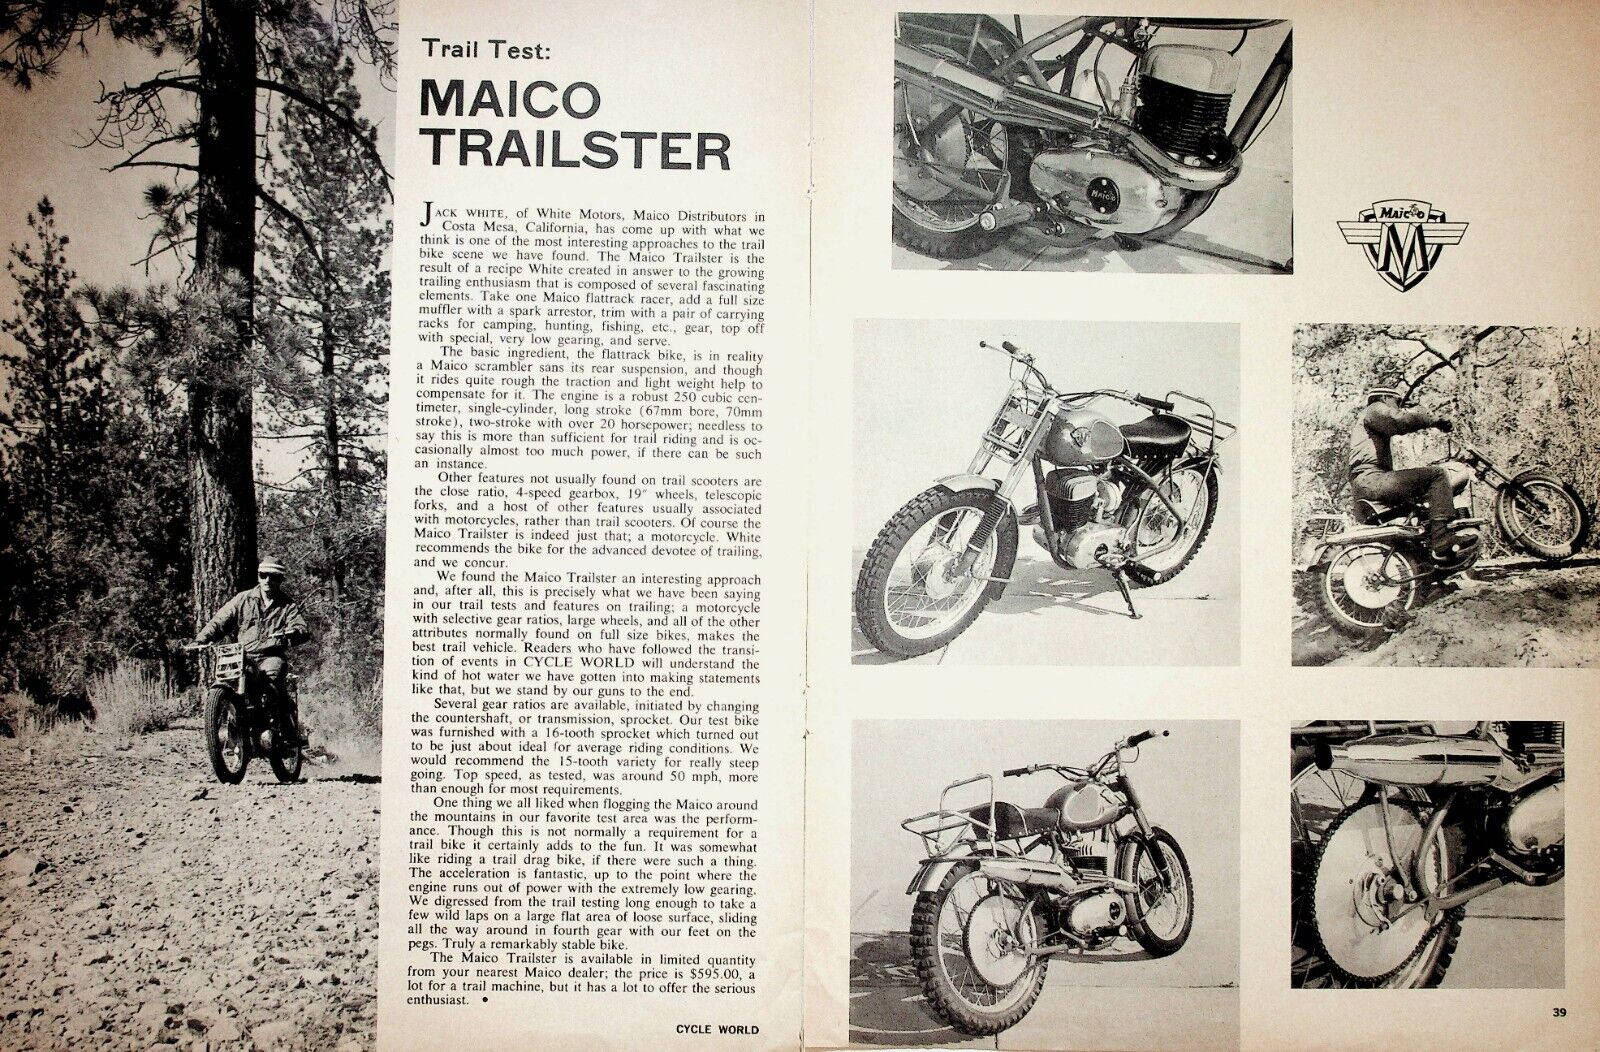 1963 Maico Trailster Motorcycle Trail Test - 2-Page Vintage Article